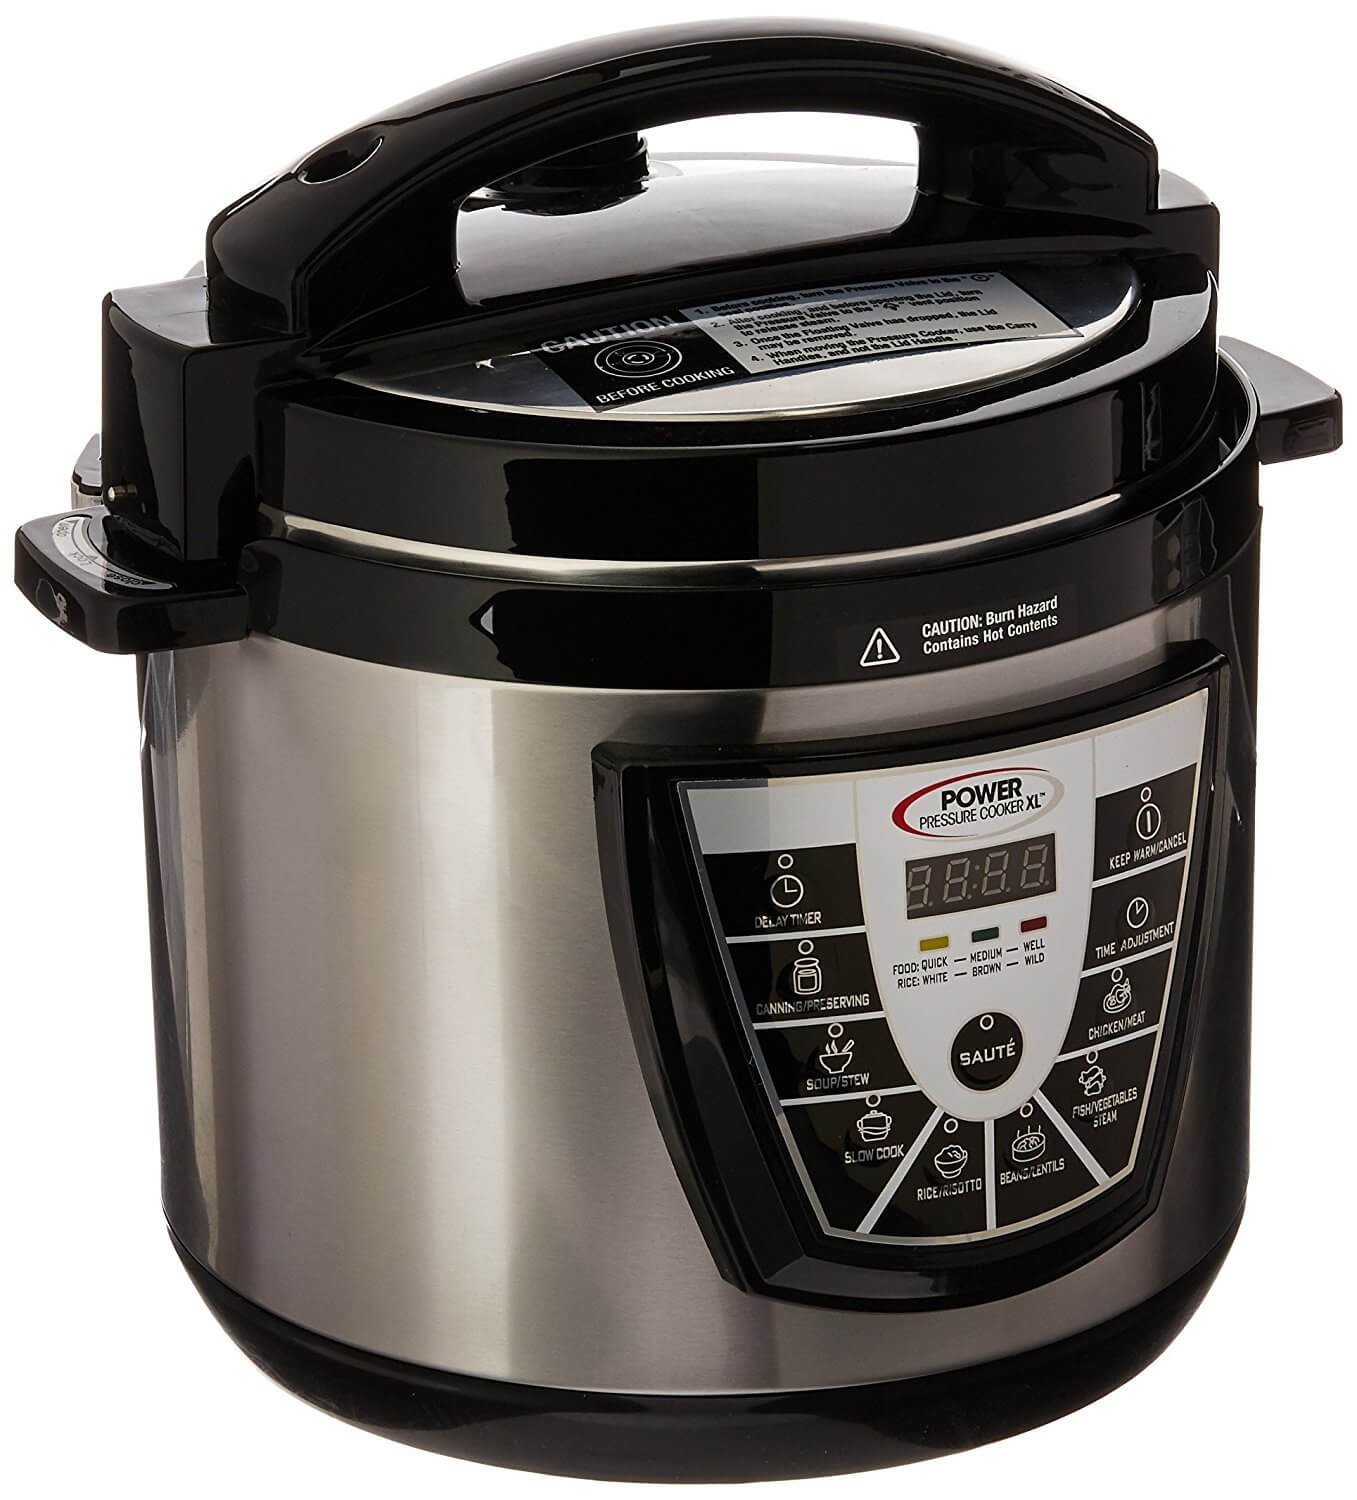 Power Pressure Cooker XL 2018 Review - Pressure Cooker Tips